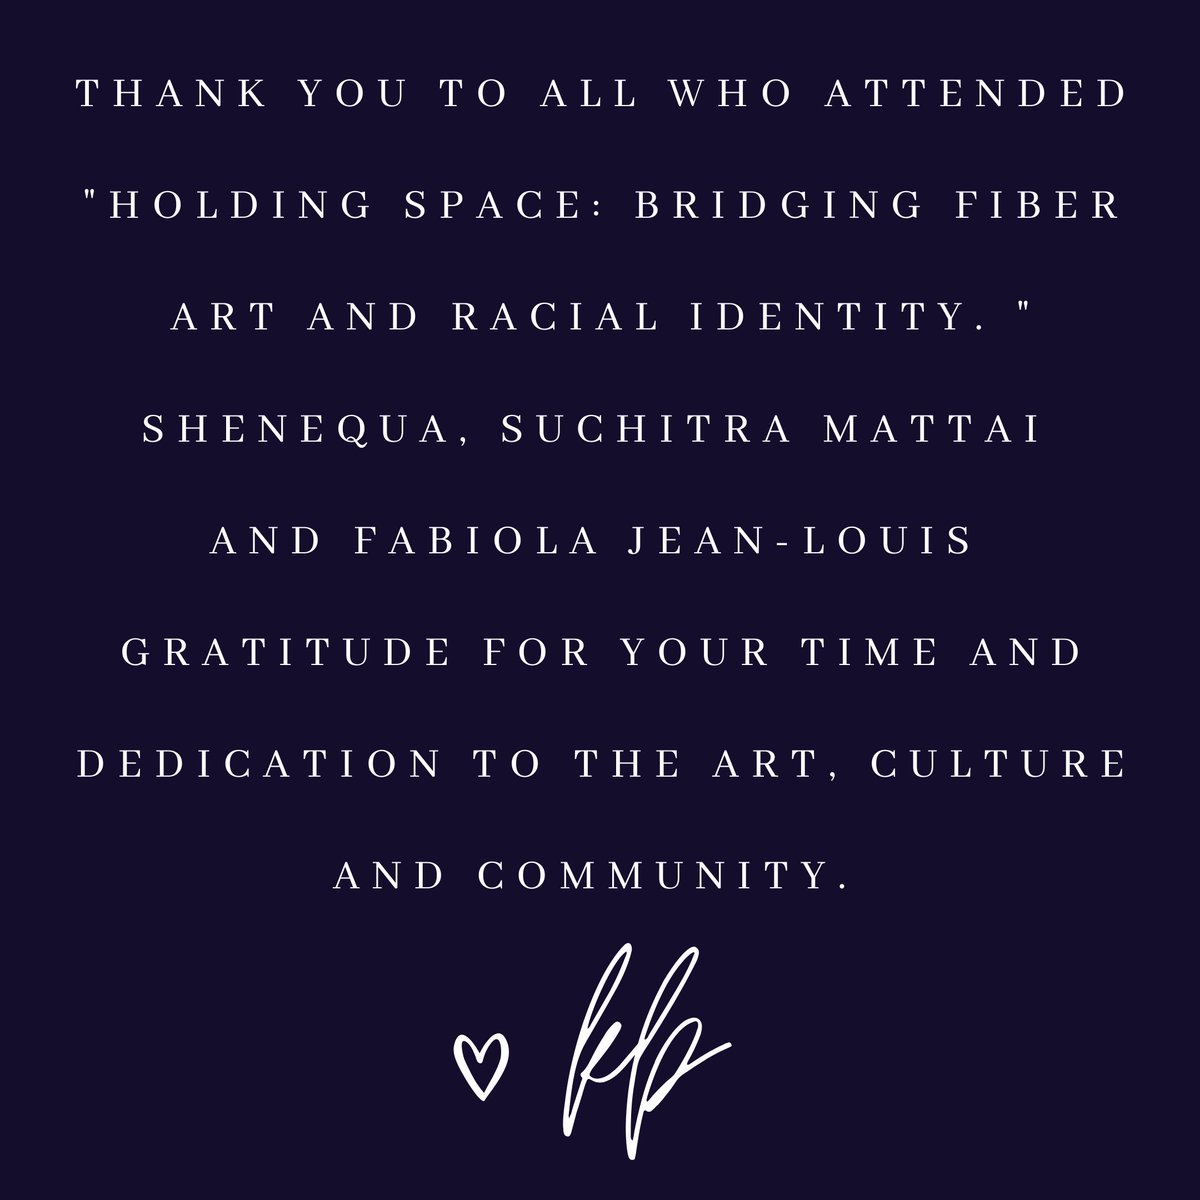 THANK YOU TO ALL WHO ATTENDED 'HOLDING SPACE: BRIDGING FIBER ART AND RACIAL IDENTITY. '
Thanks @surface_design for presenting this and our partners @WomenInTheArts and Textile Arts Los Angeles. 

#fiberart #textileart #artivism #socialpractice #SocialJustice #bipocmakers